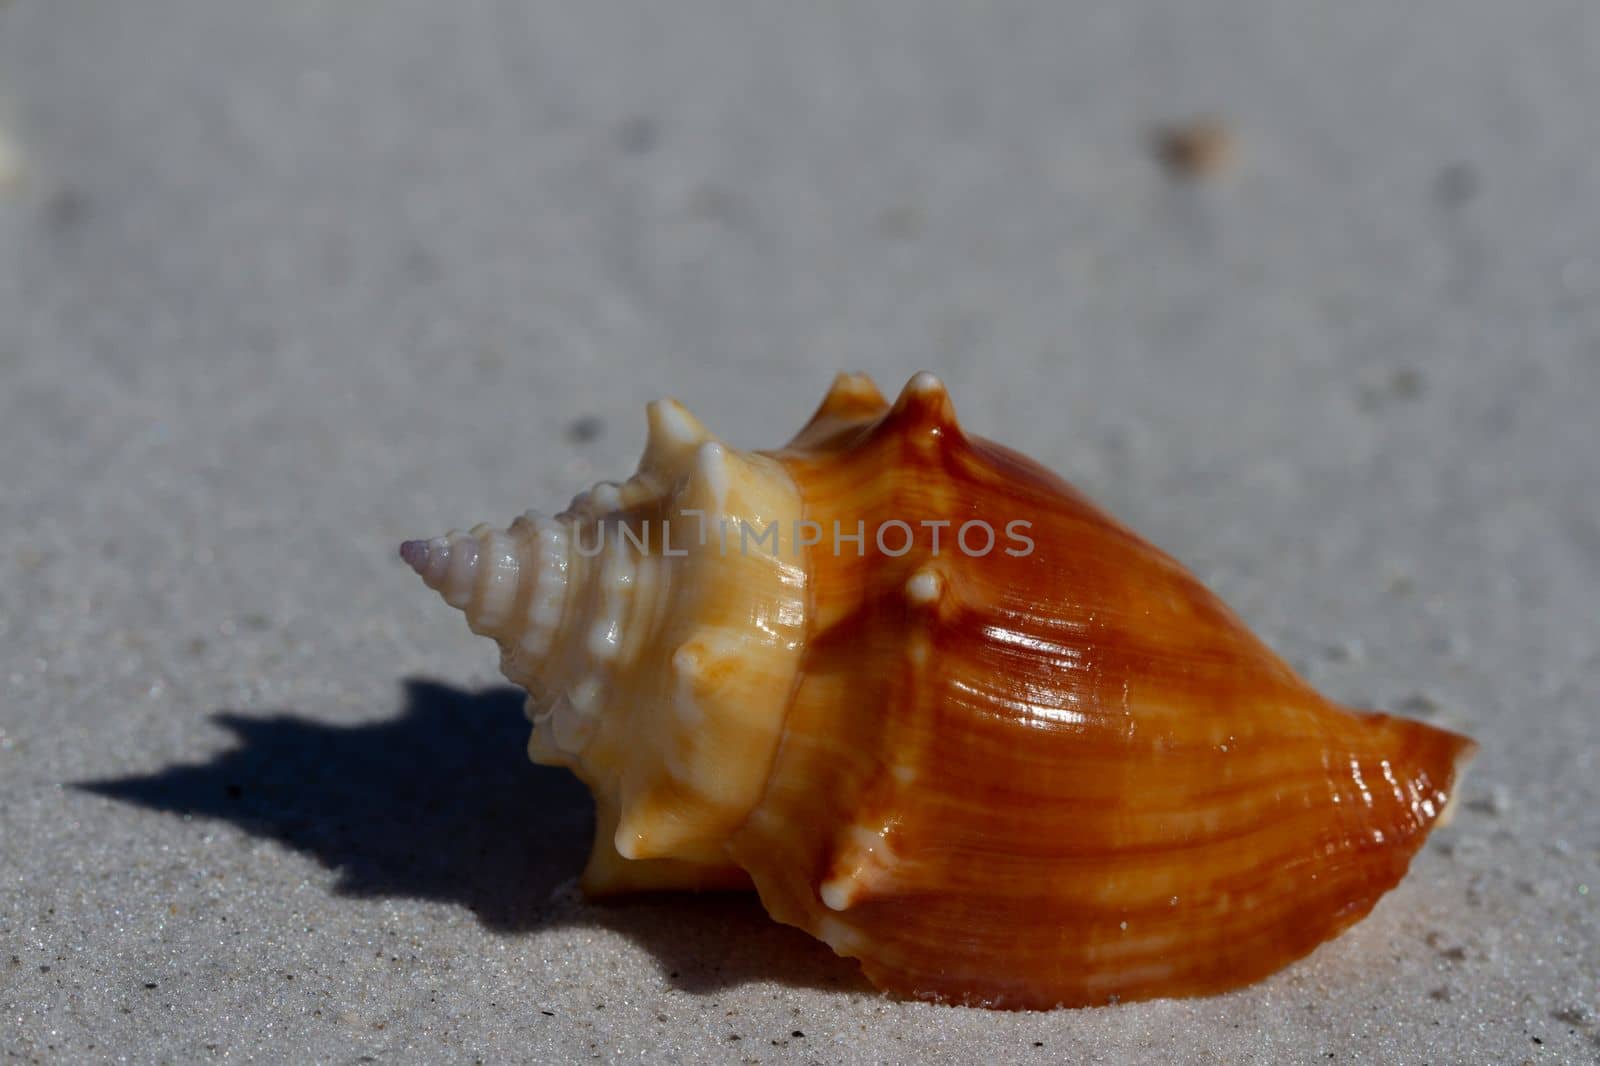 Front view of a Florida fighting conch, Strombus alatus, found on a beach, Naples Florida, United States